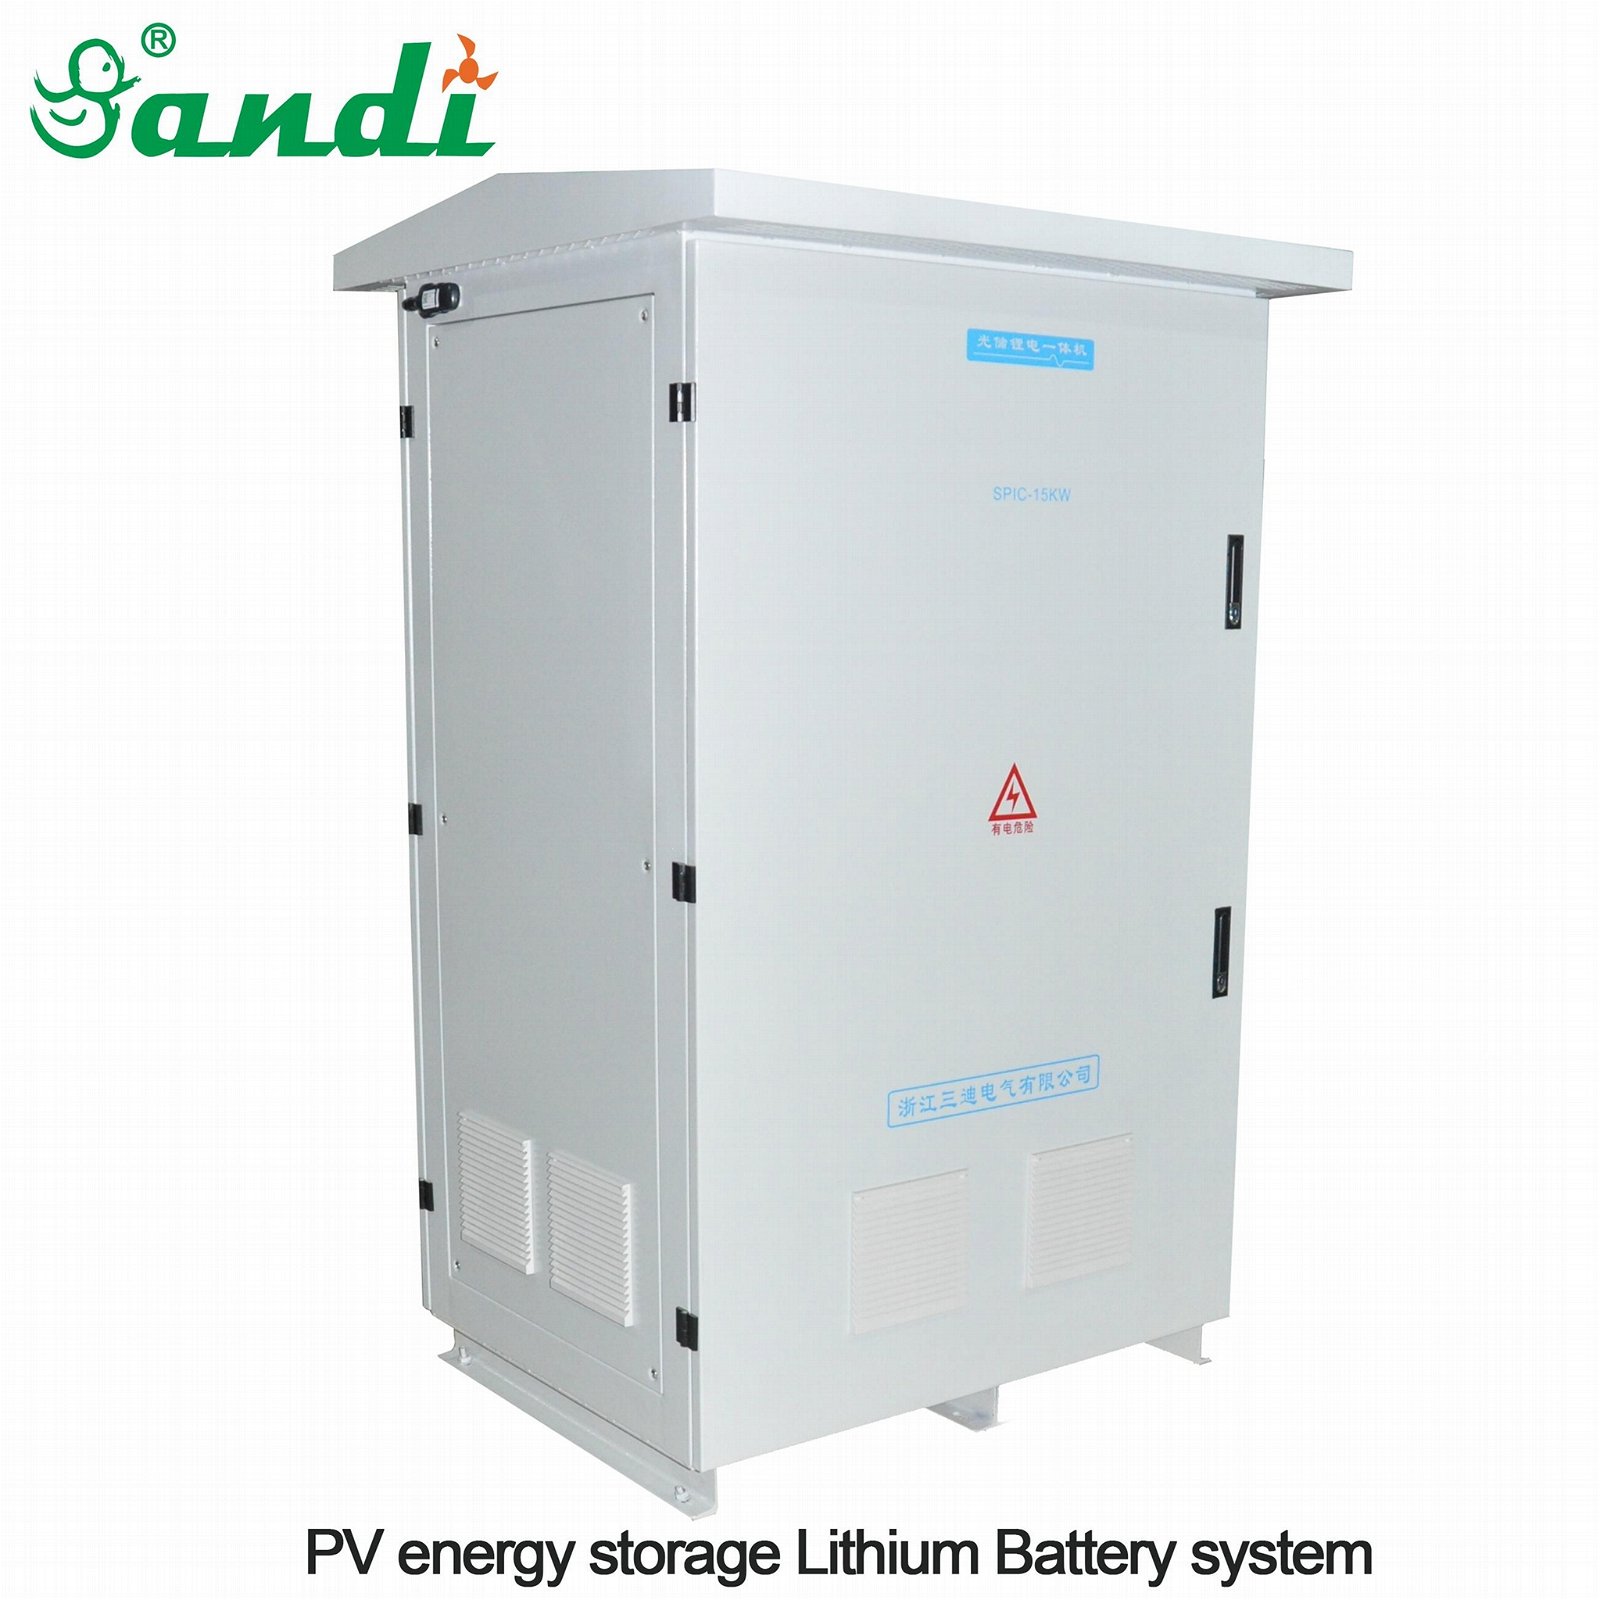 All-in-one 75KWH Lithium iron battery (LiFePO4) with BMS hybrid inverter charger